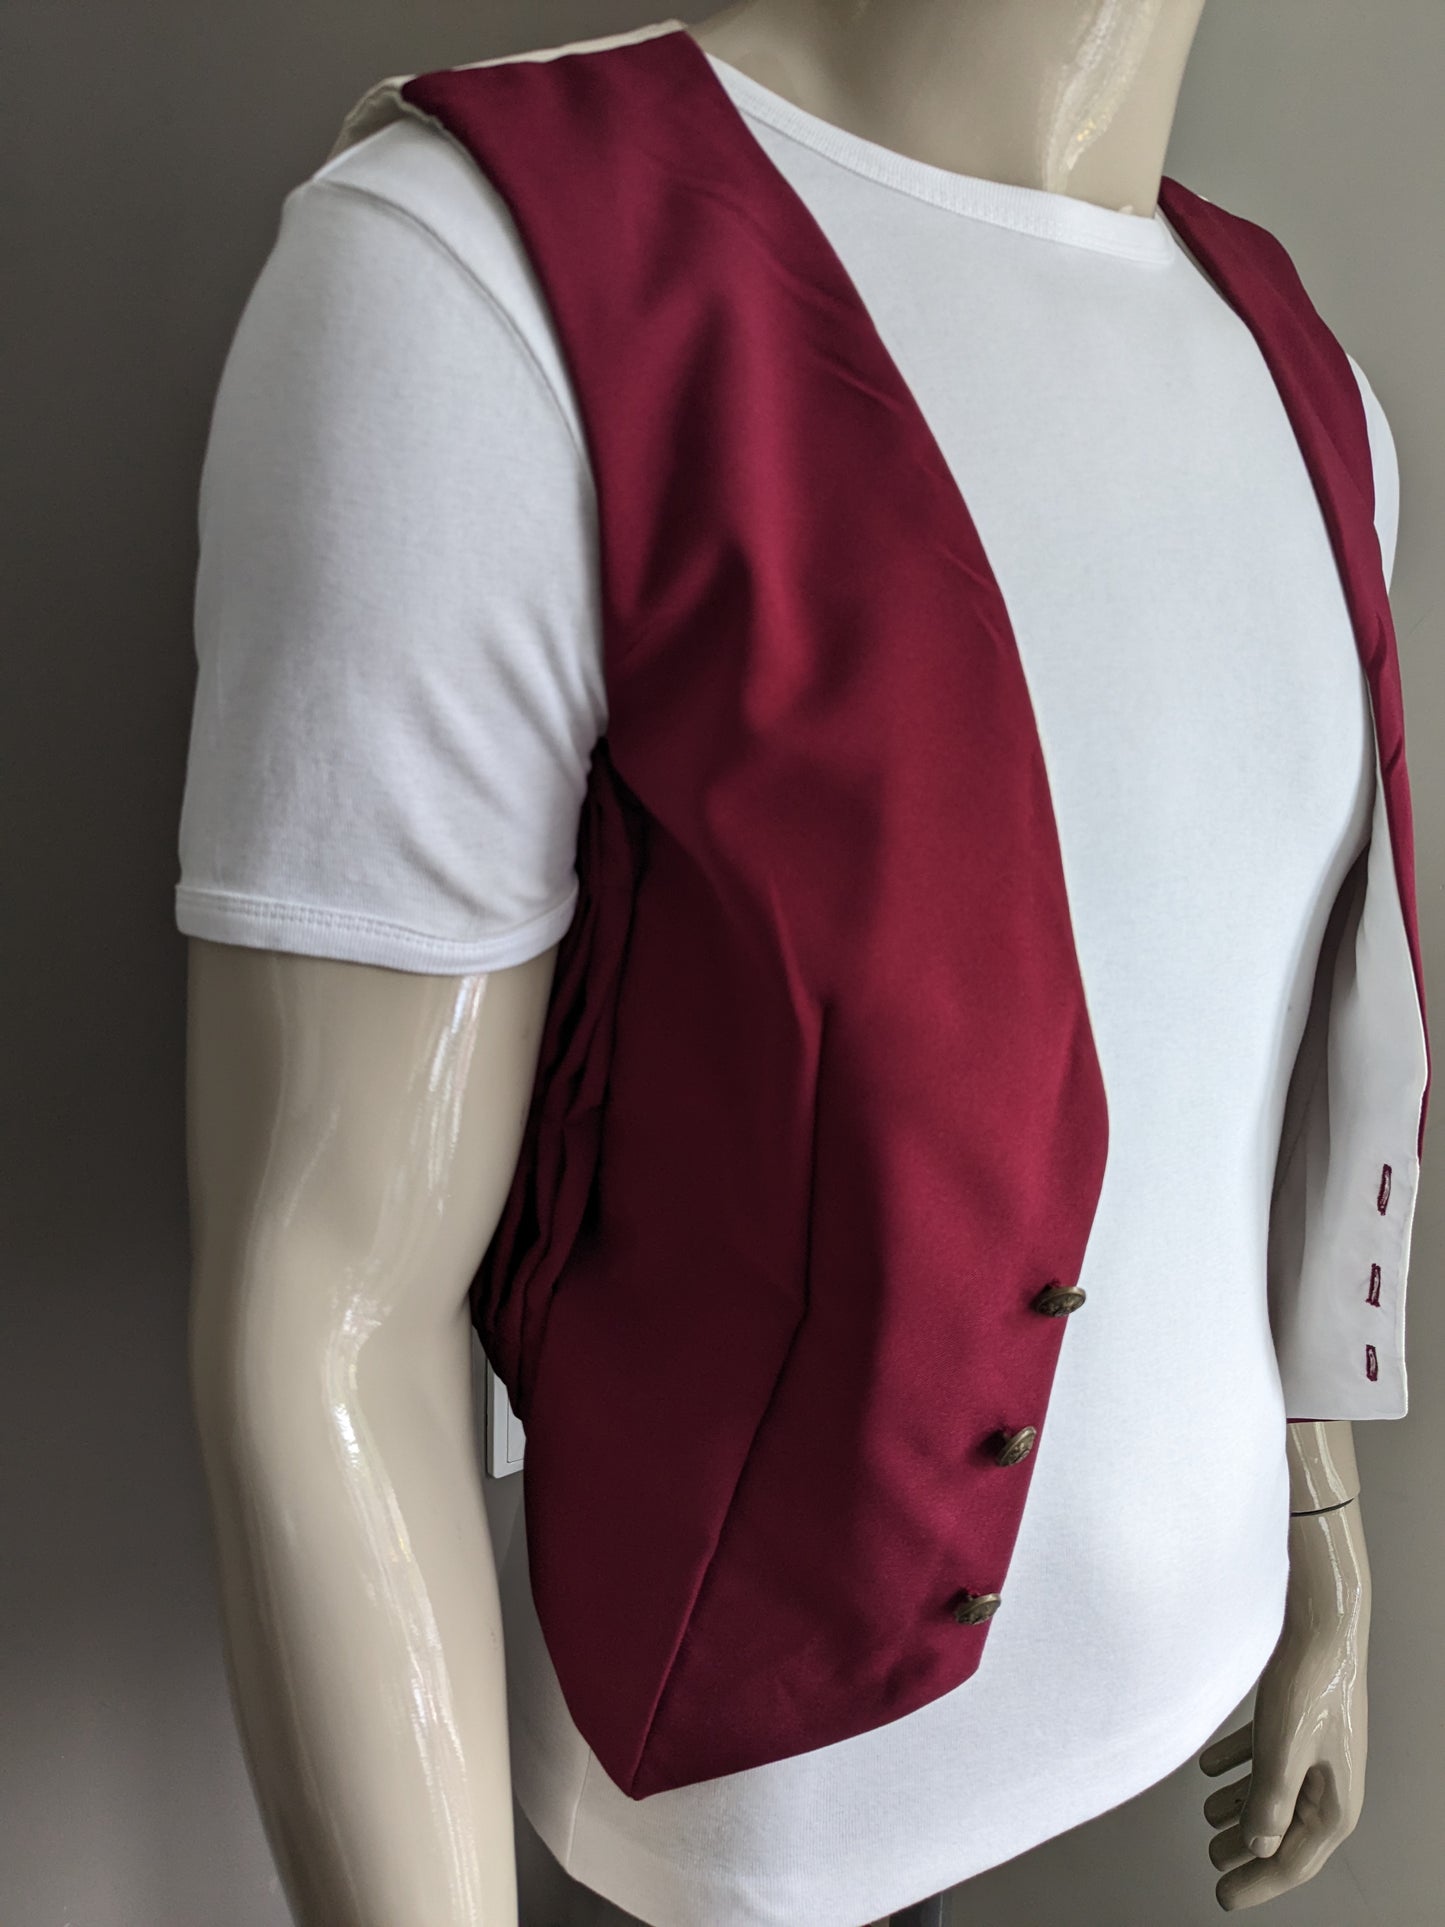 Vintage waistcoat. Bordeaux colored with beautiful buttons and unique sides. Size XS.